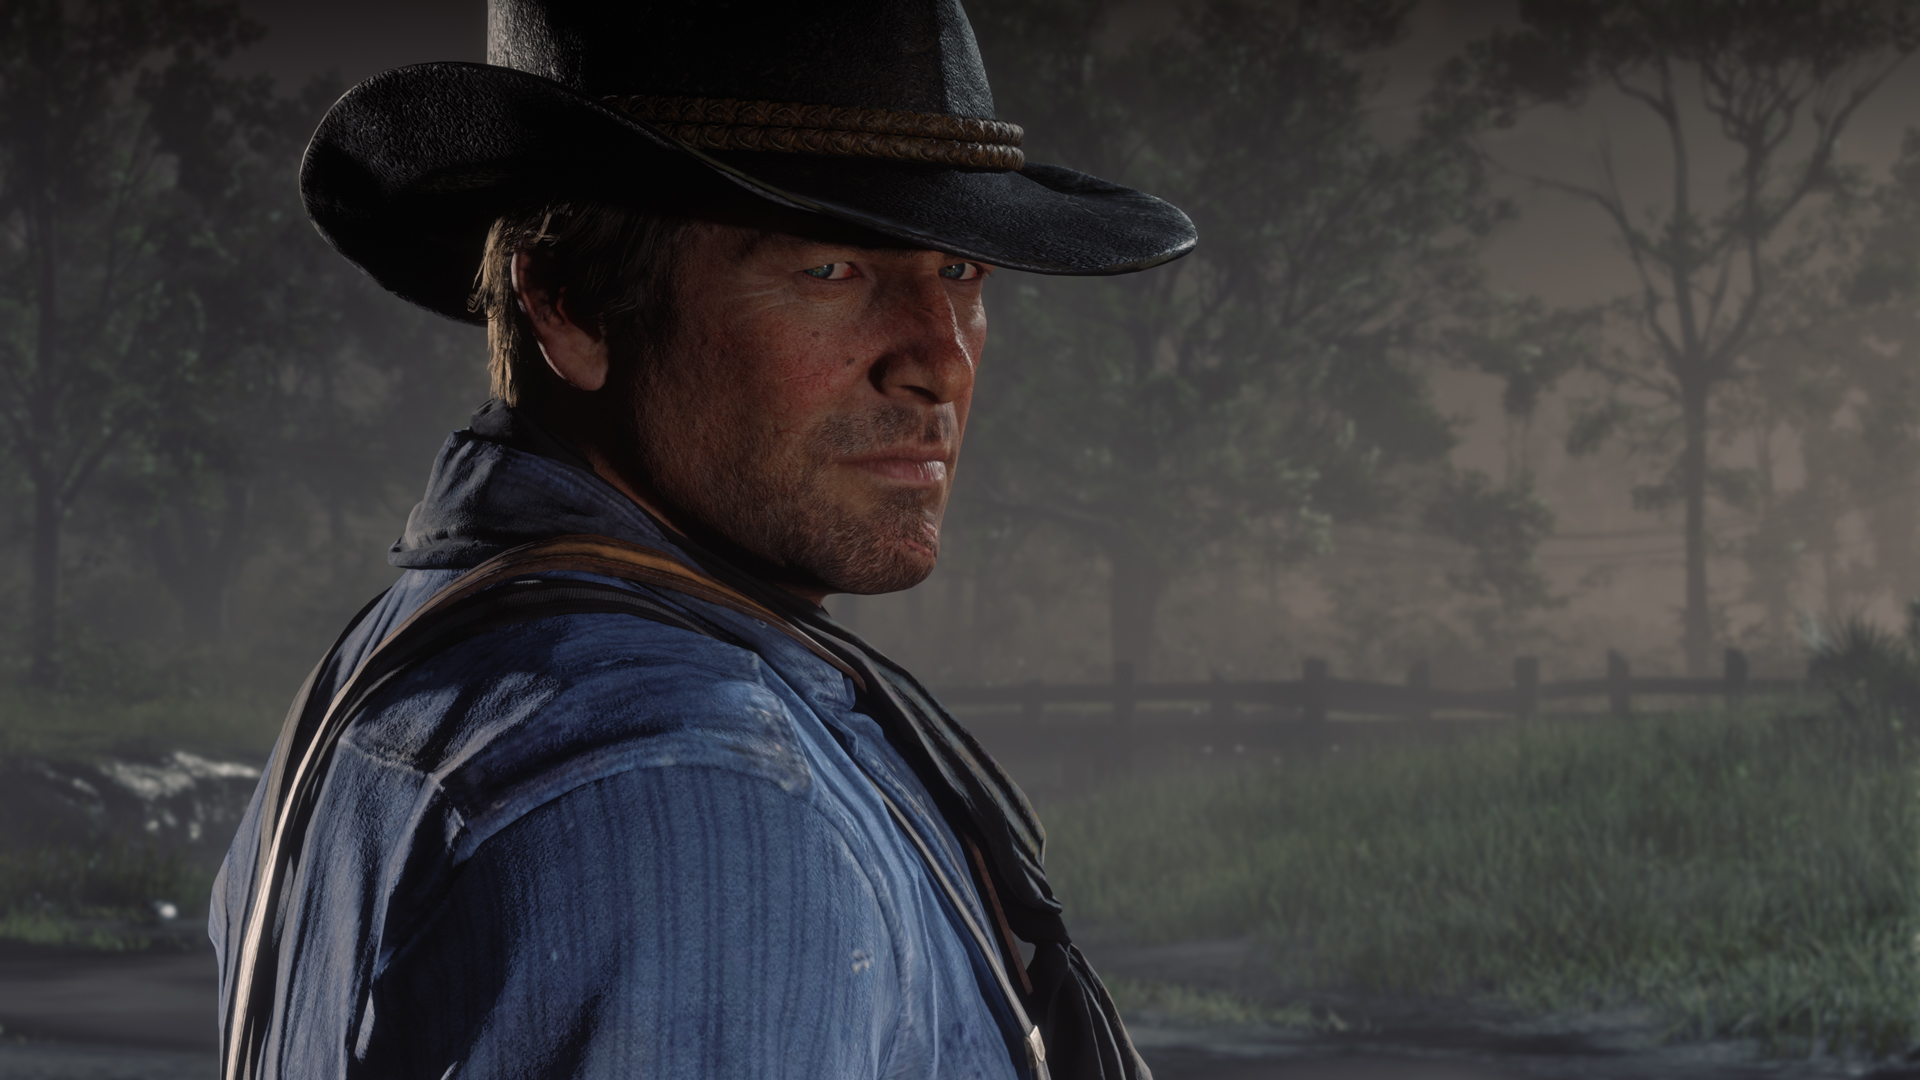 Abandoned on PlayStation 5 going rival Red Dead 2 says developer